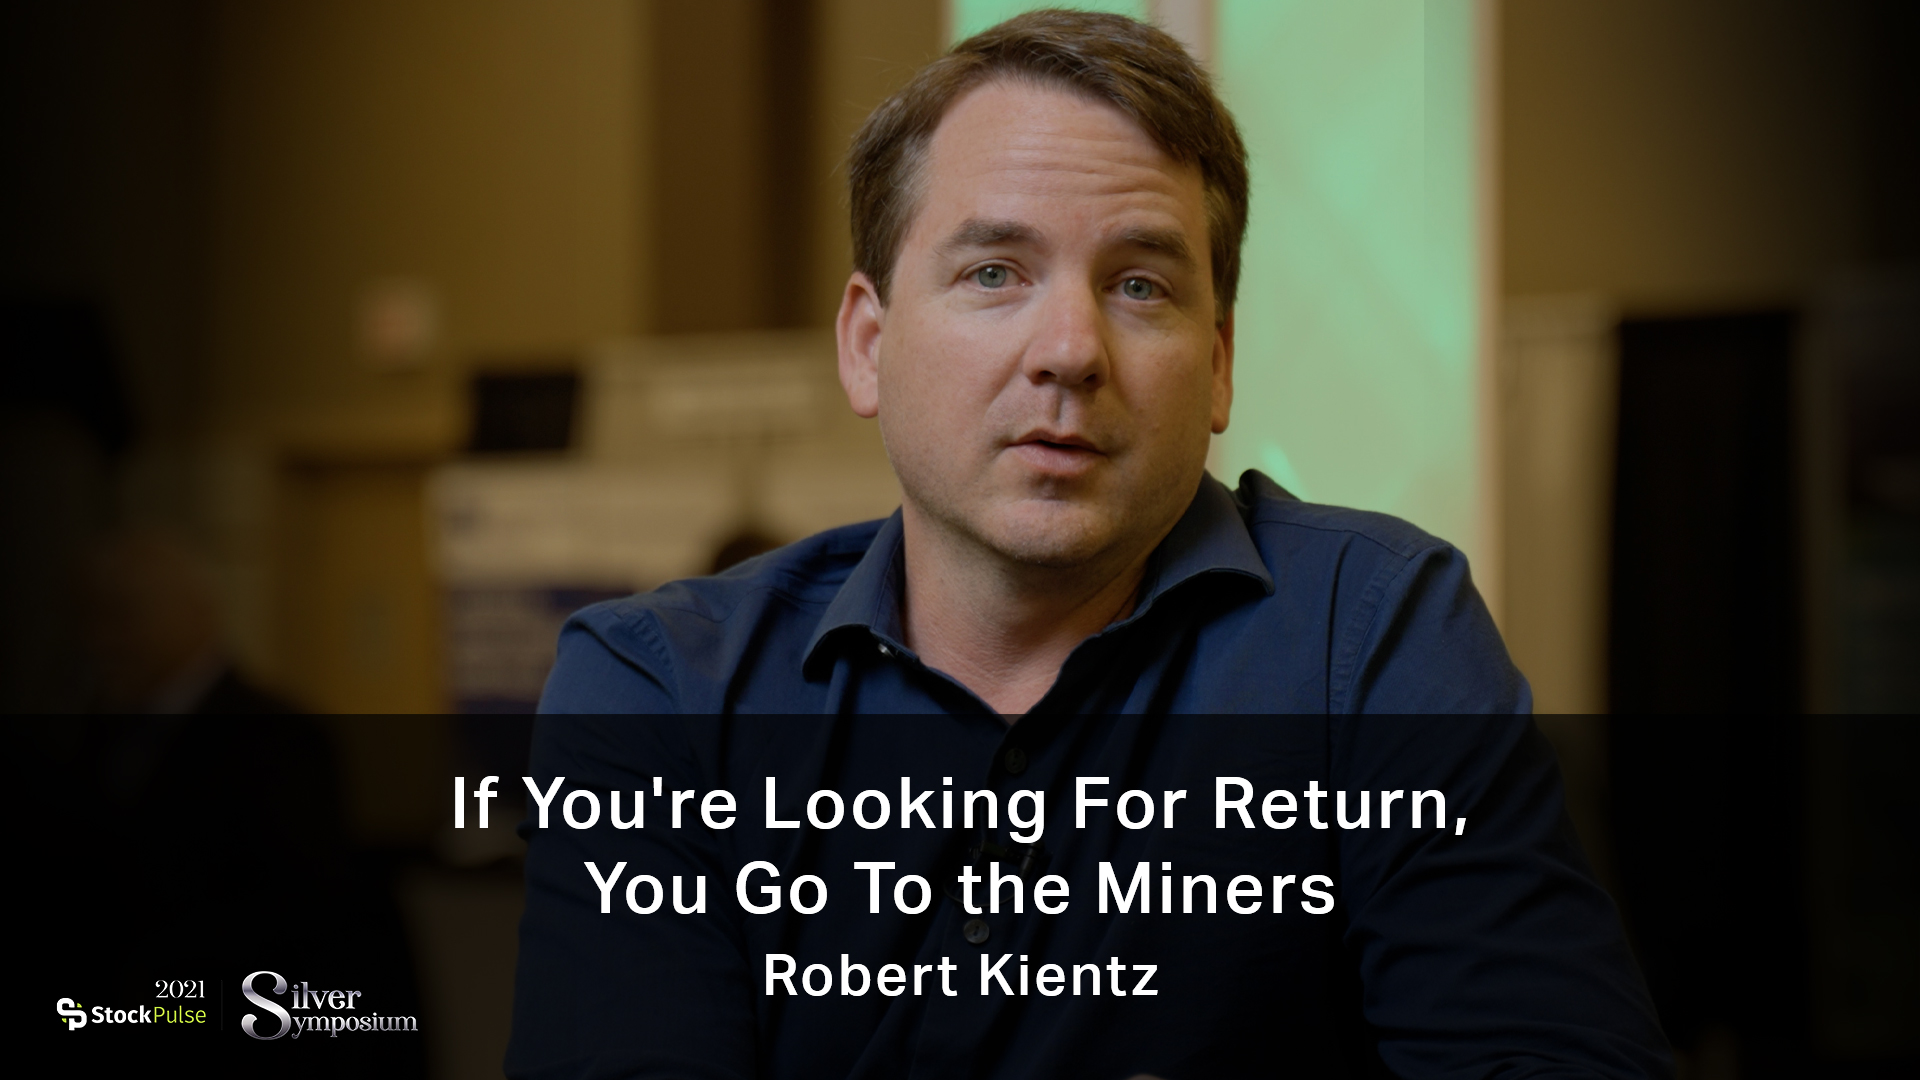 Robert Kientz: If You’re Looking For Return, You Go To the Miners